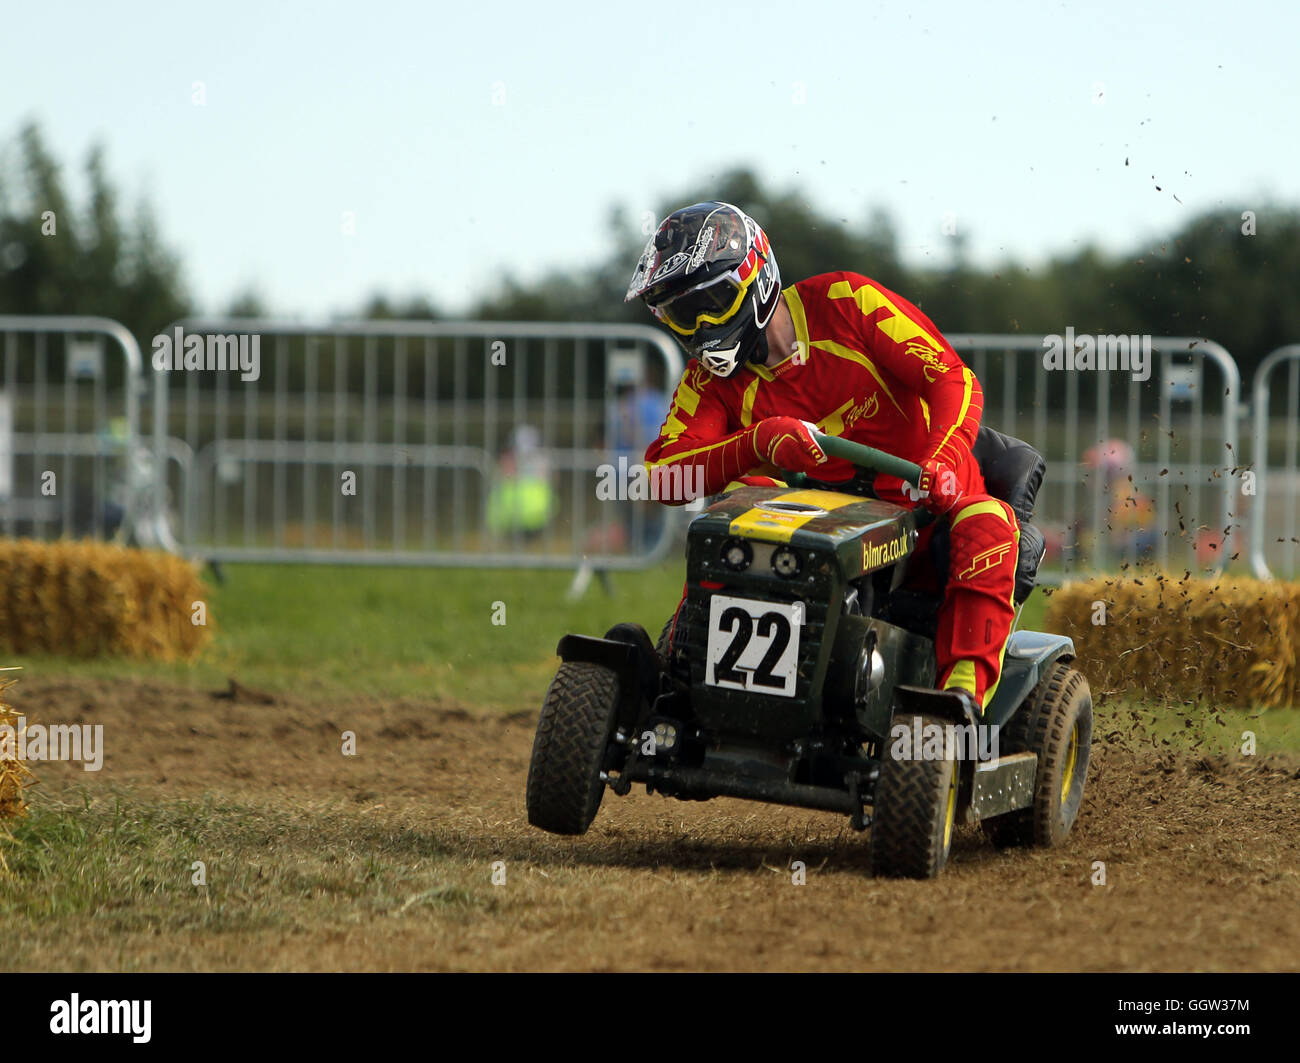 A member of the Smack the Pony team tries to qualify ahead of the 12 hour lawn mower race - which commences at 8pm - at Five Oaks, West Sussex. Stock Photo